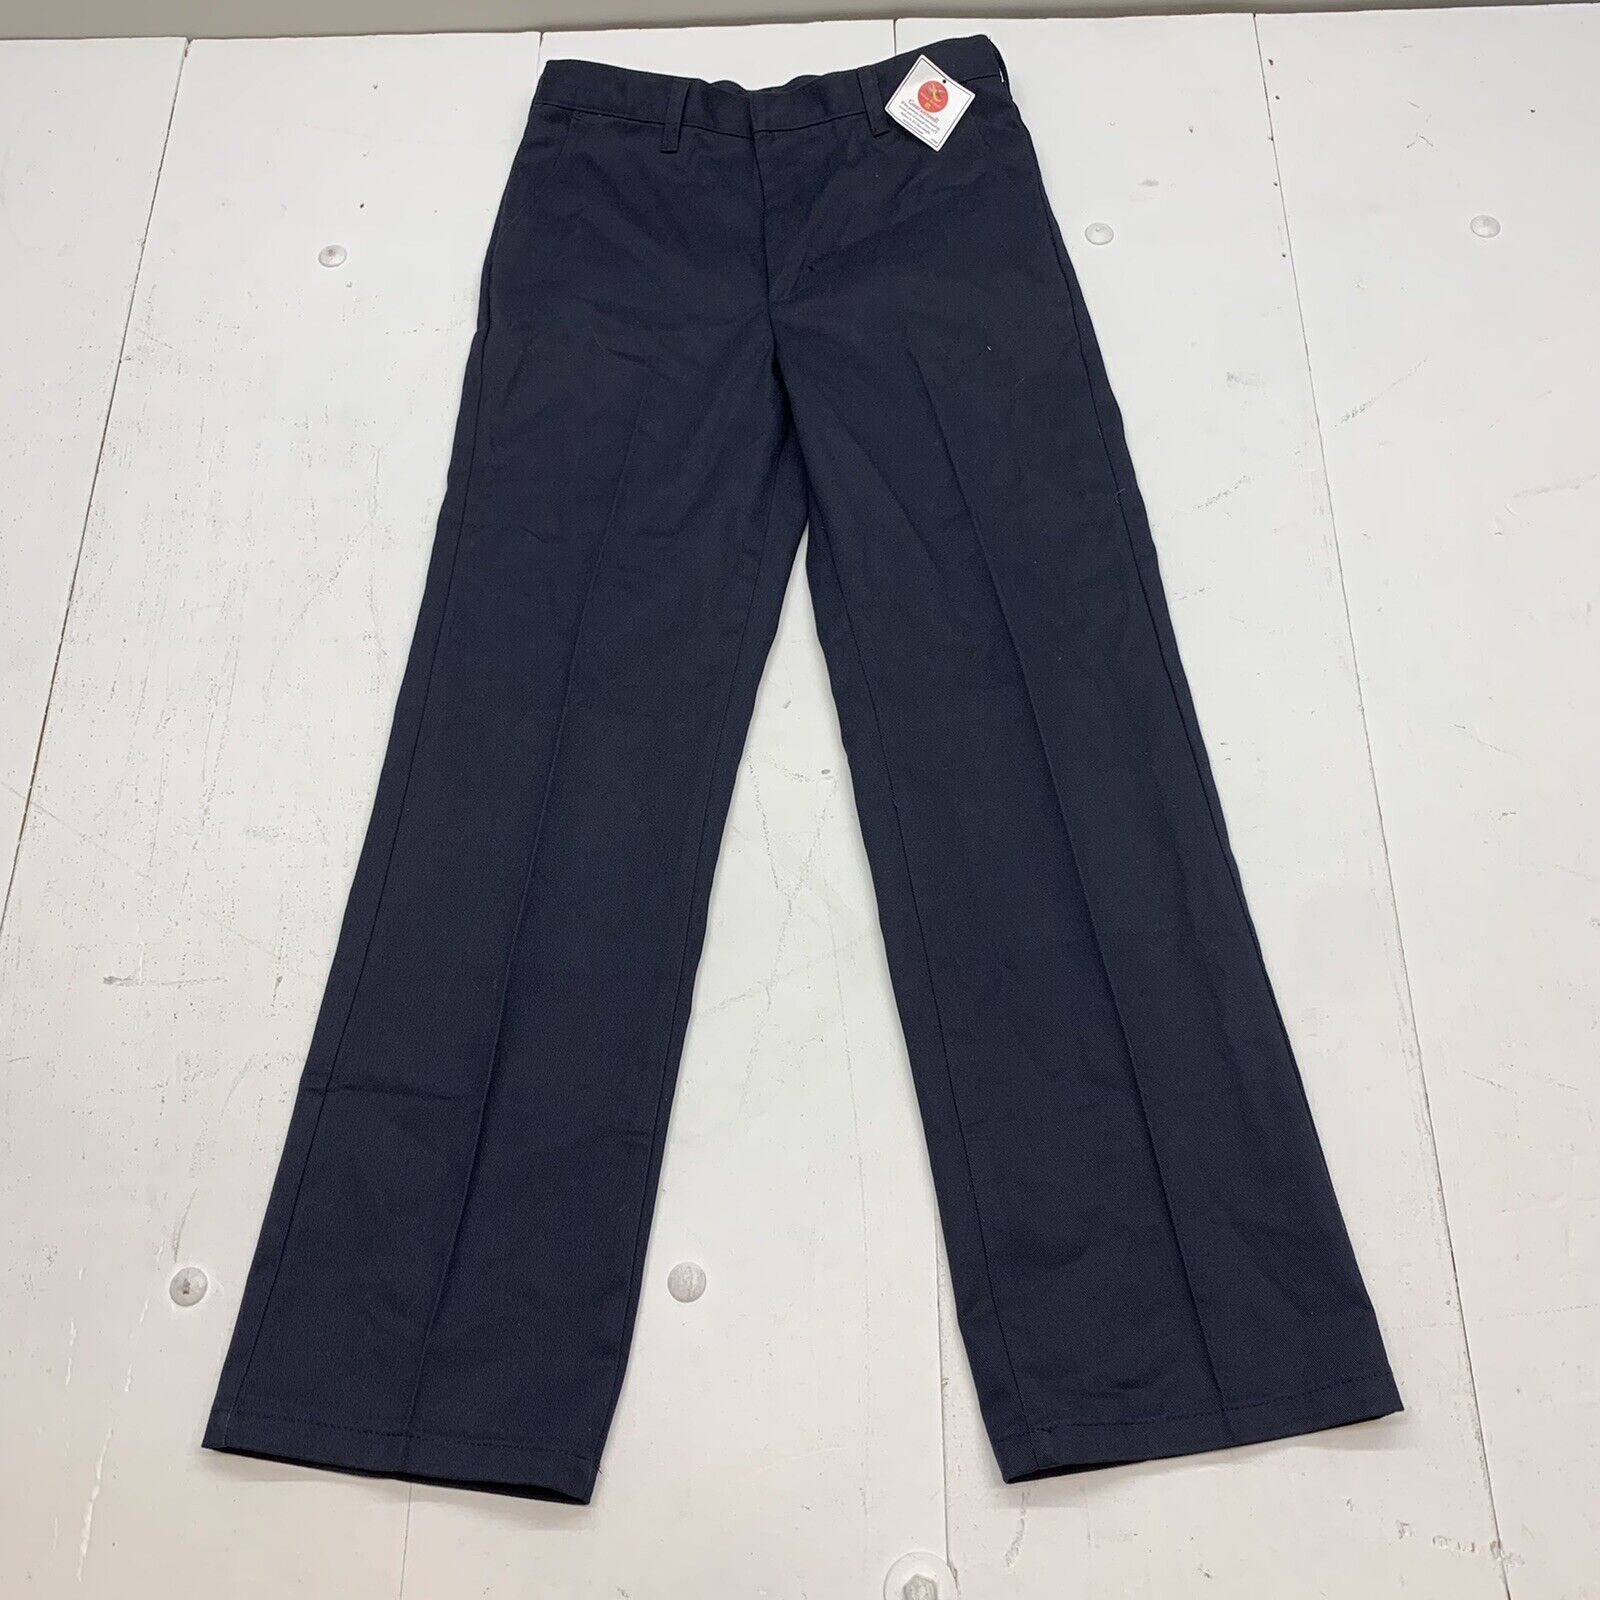 A+ Boys Relax Fit navy blue dress pants size 16 - beyond exchange